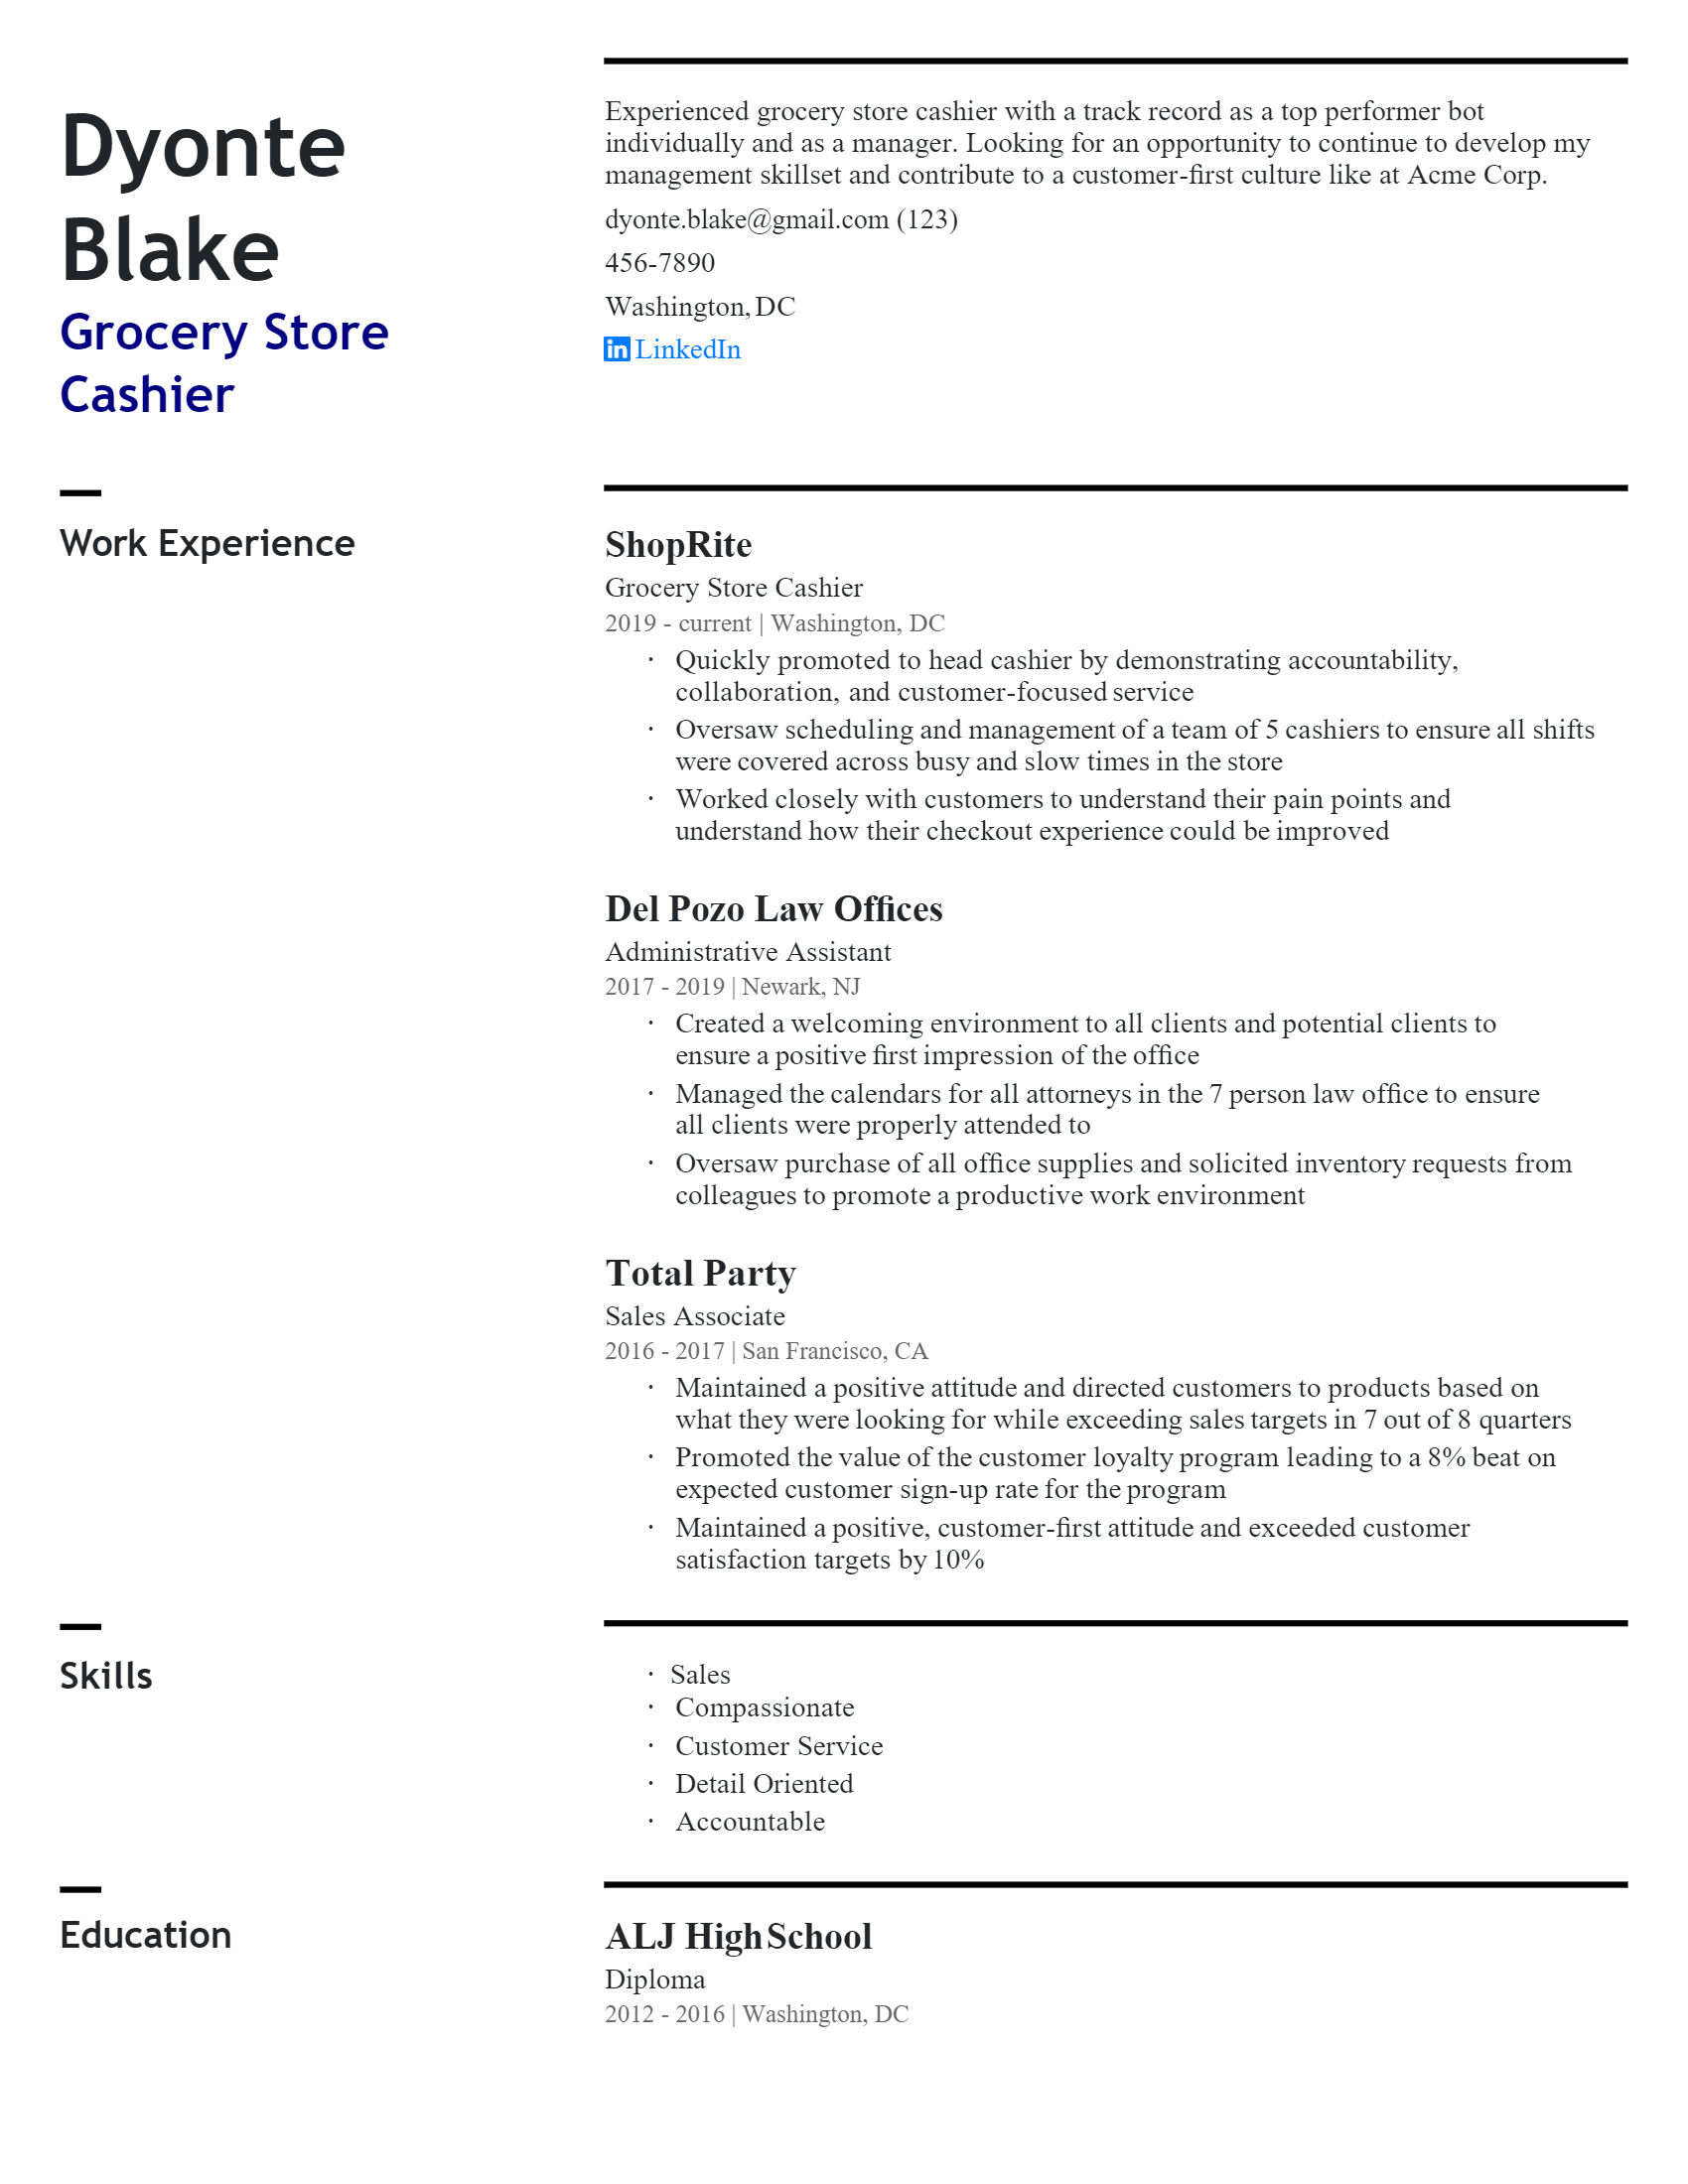 Grocery Store Cashier Resume .Docx (Word)